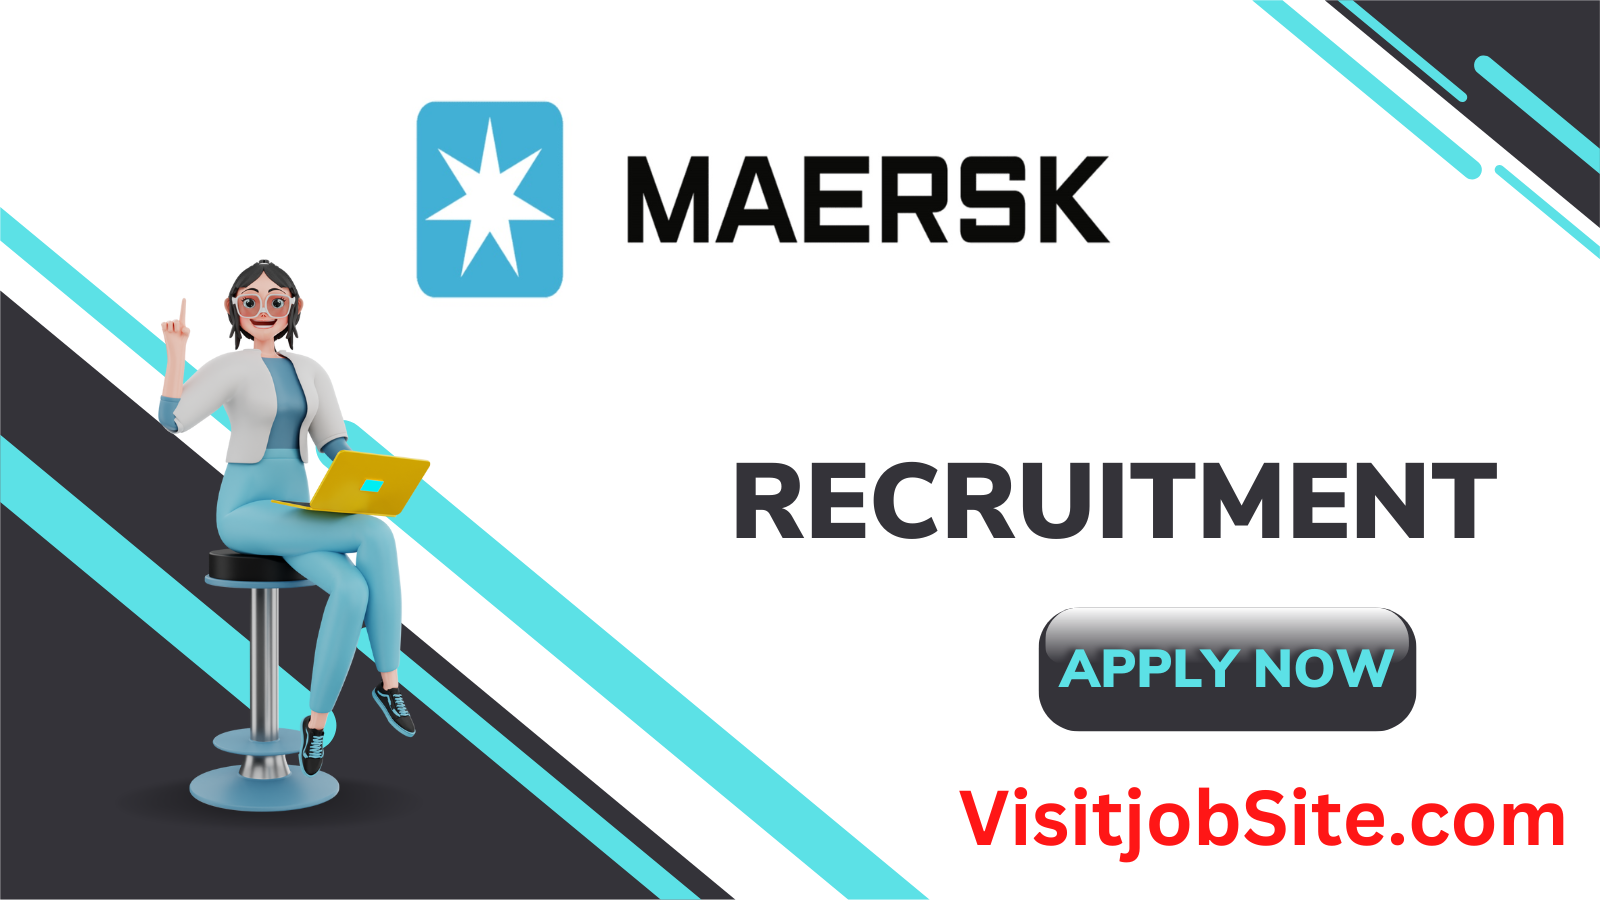 Maersk Off Campus Drive